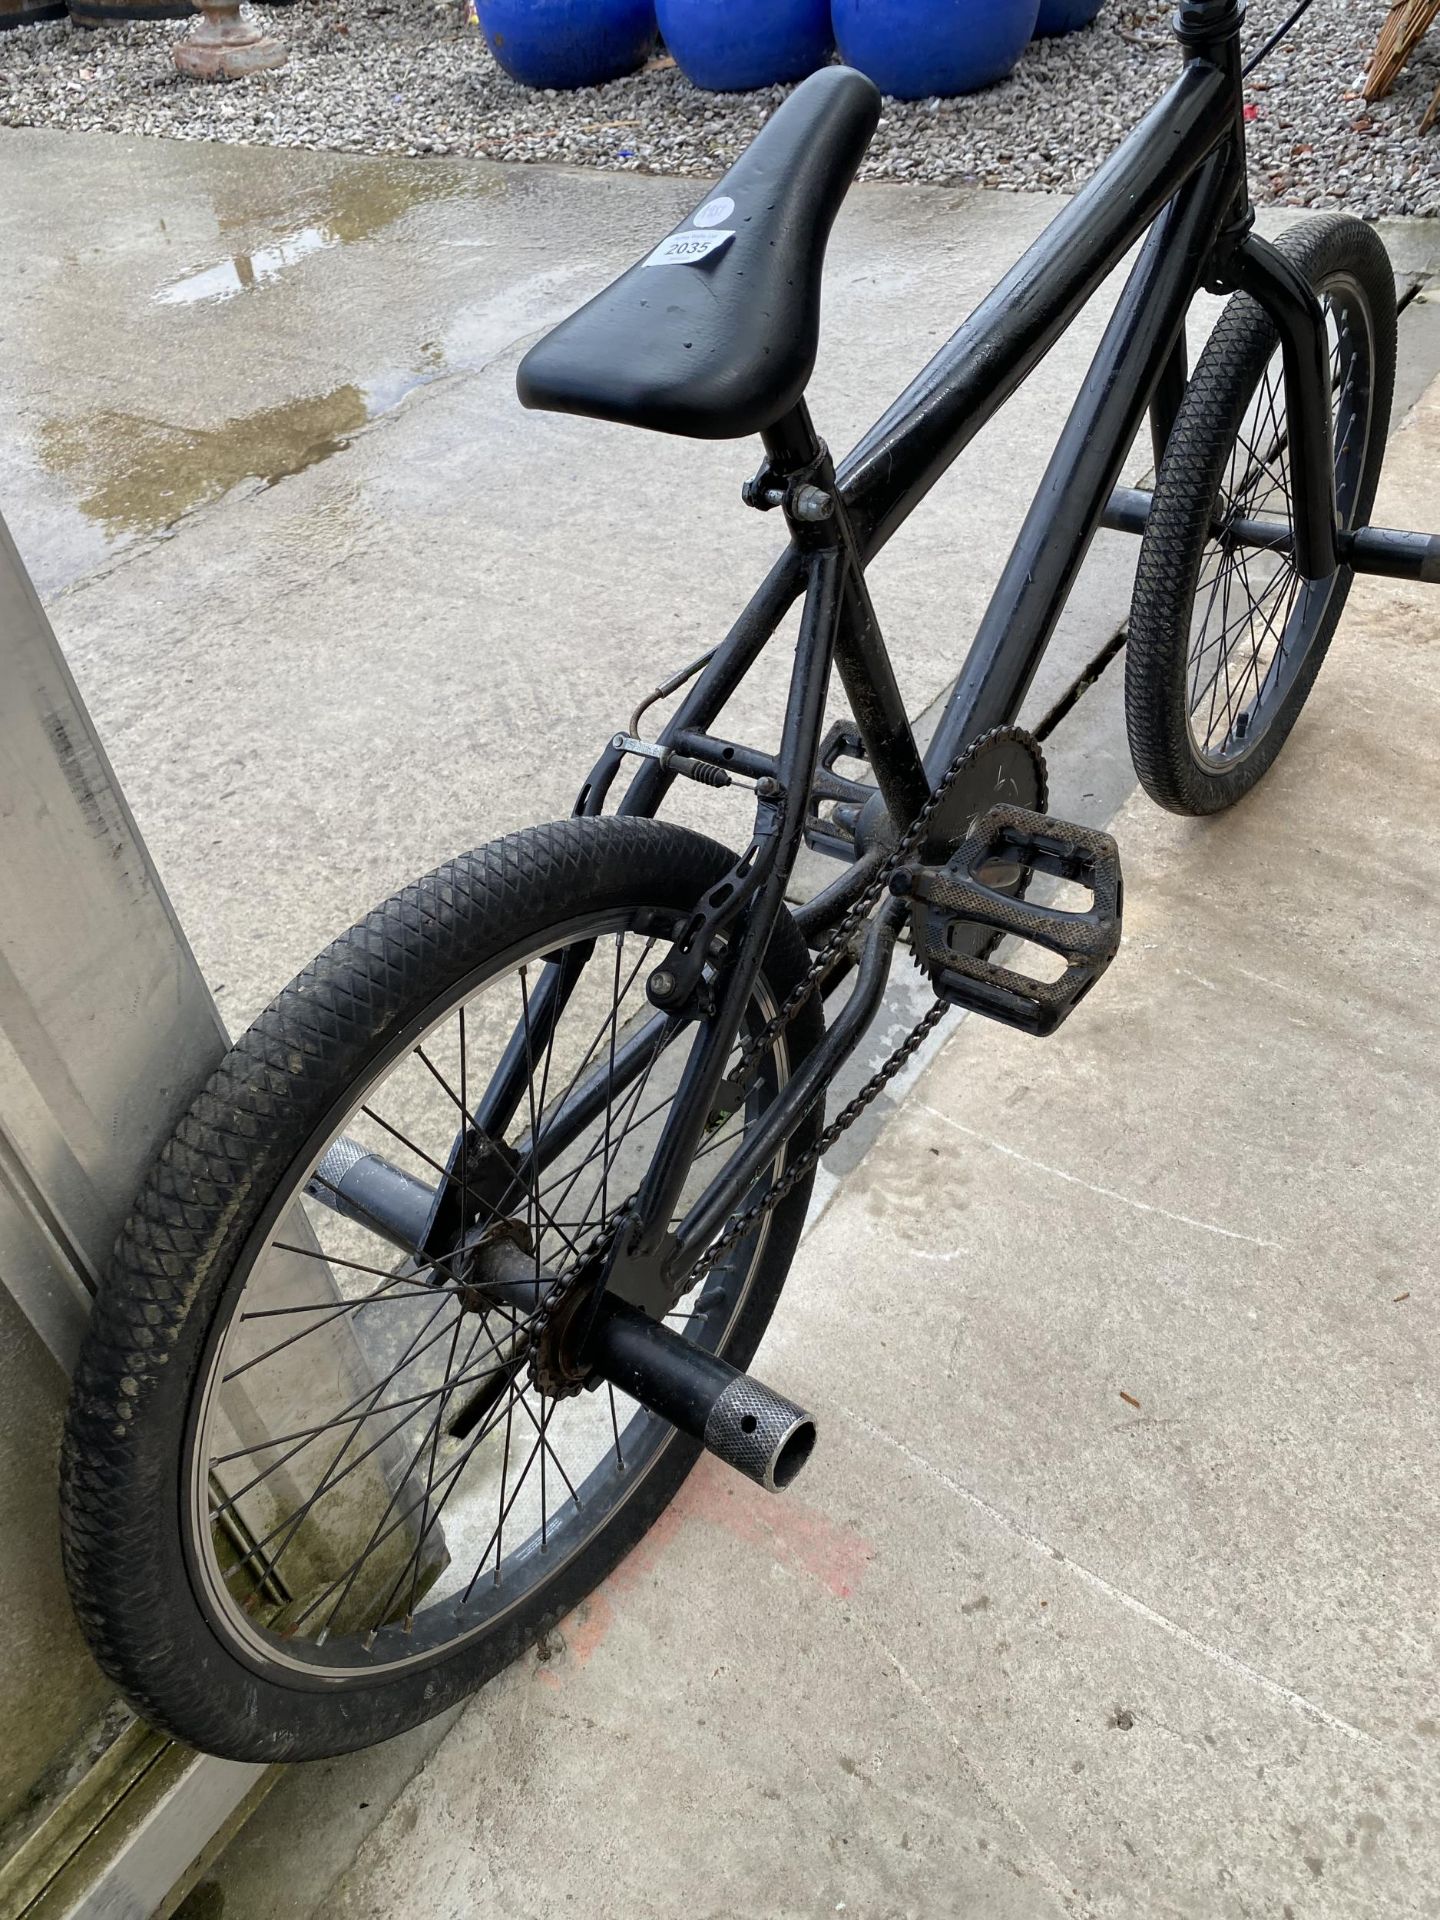 A CHILDS BMX BIKE WITH REAR STUNT PEGS - Image 2 of 3